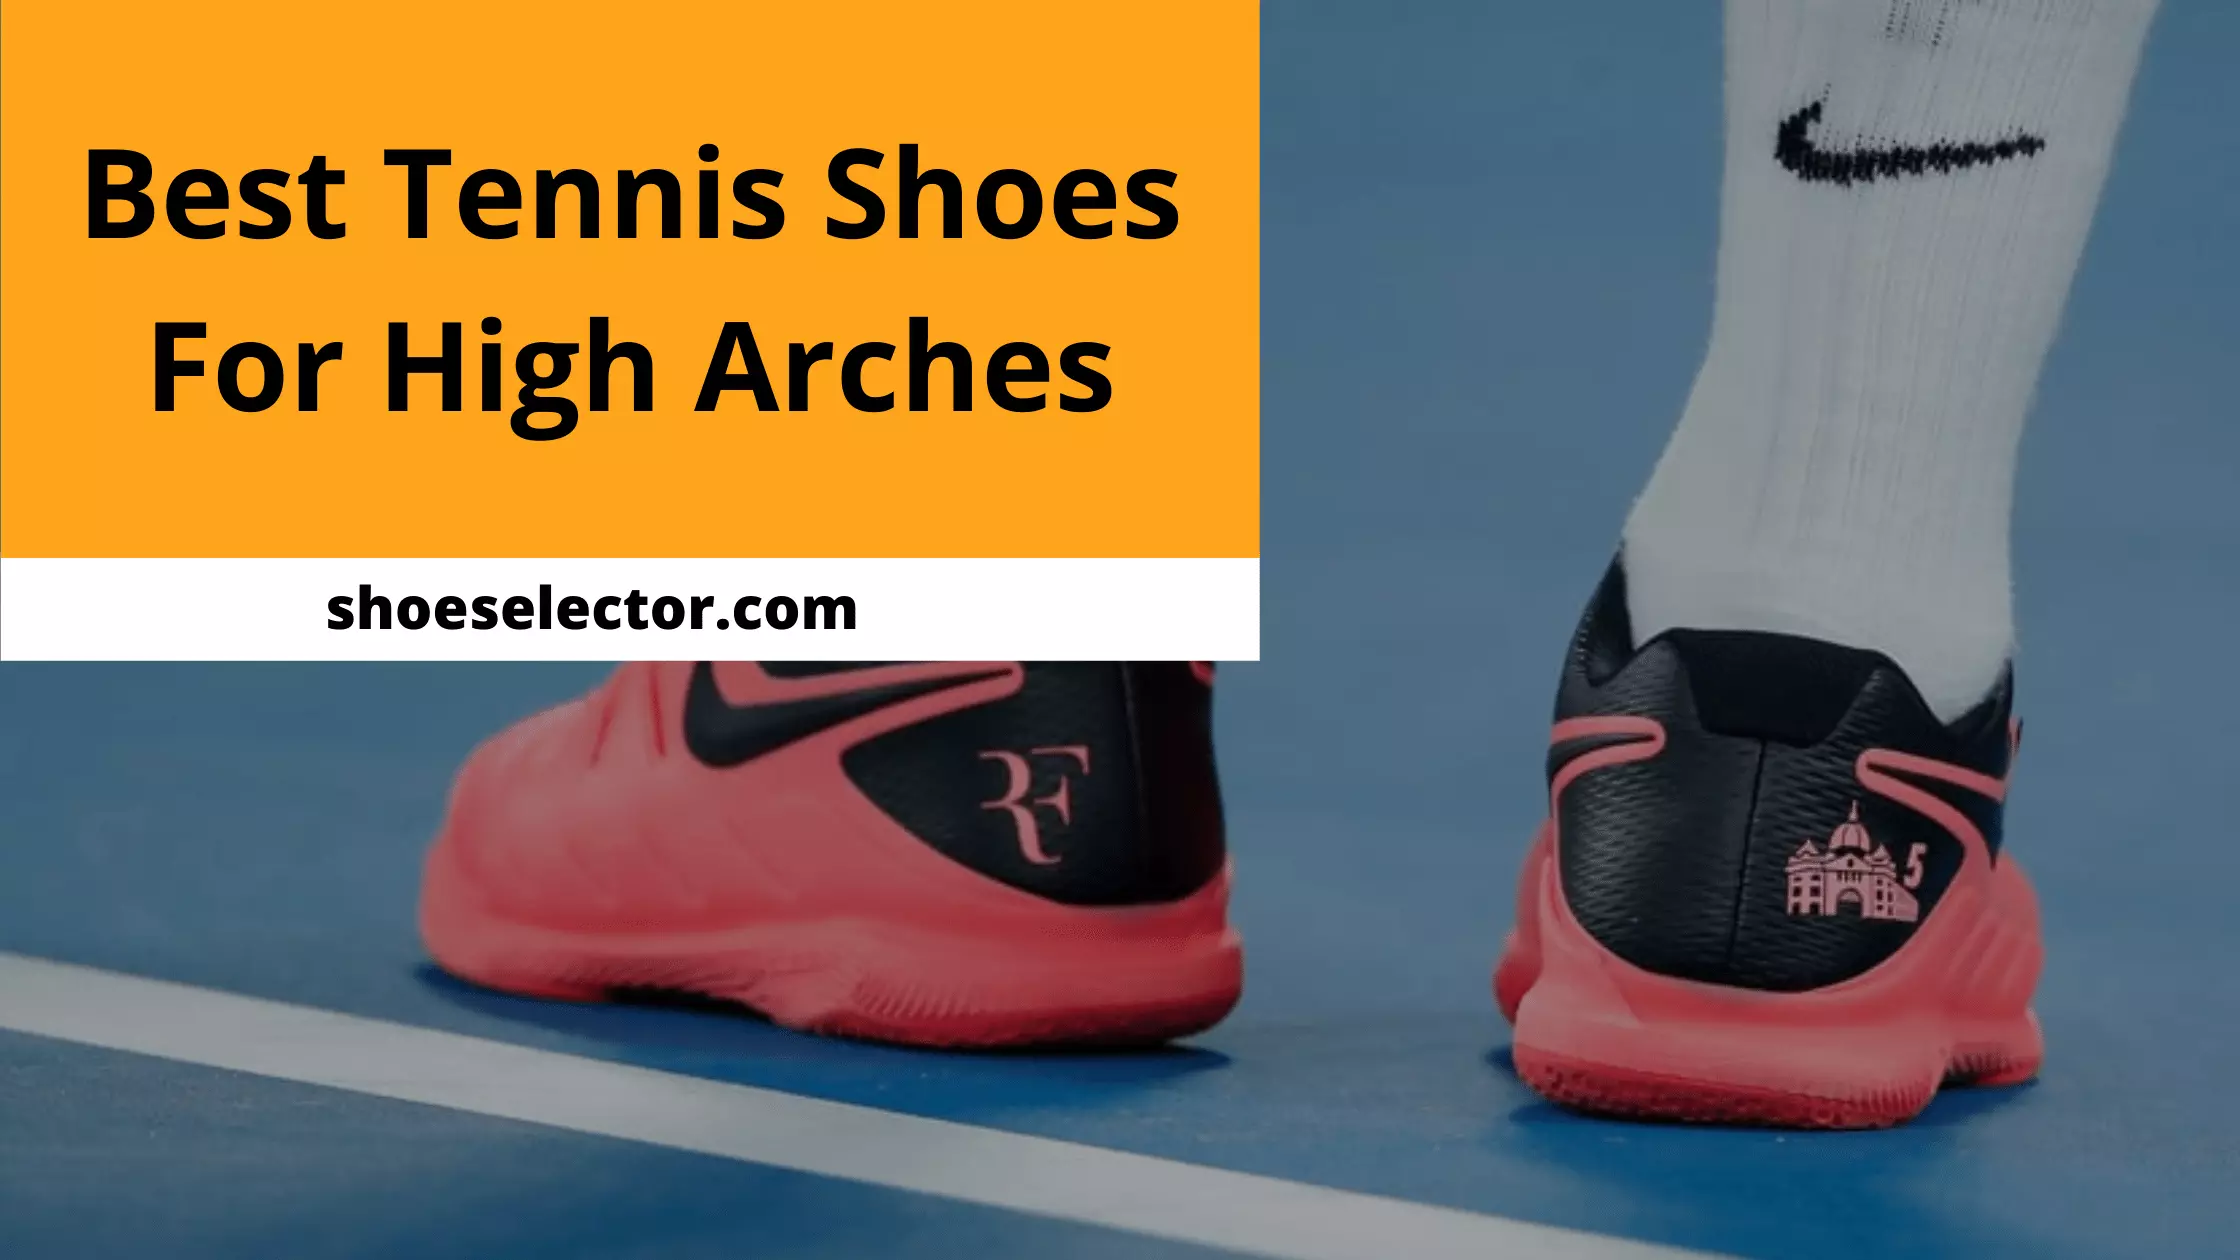 Best Tennis Shoes For High Arches - Comprehensive Guide